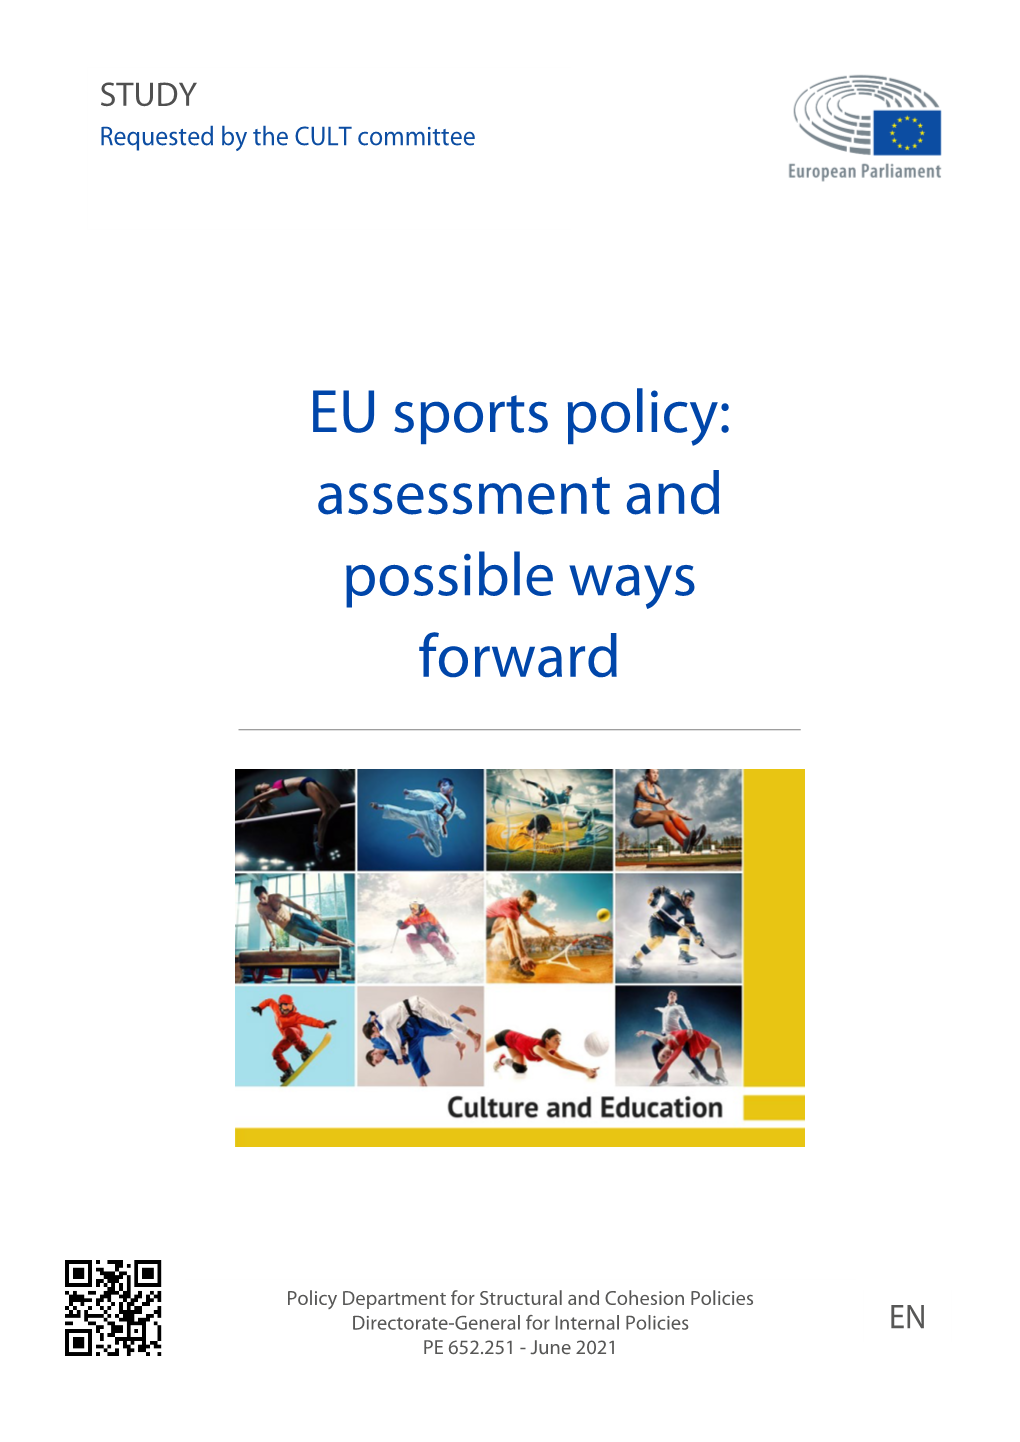 EU Sports Policy: Assessment and Possible Ways Forward